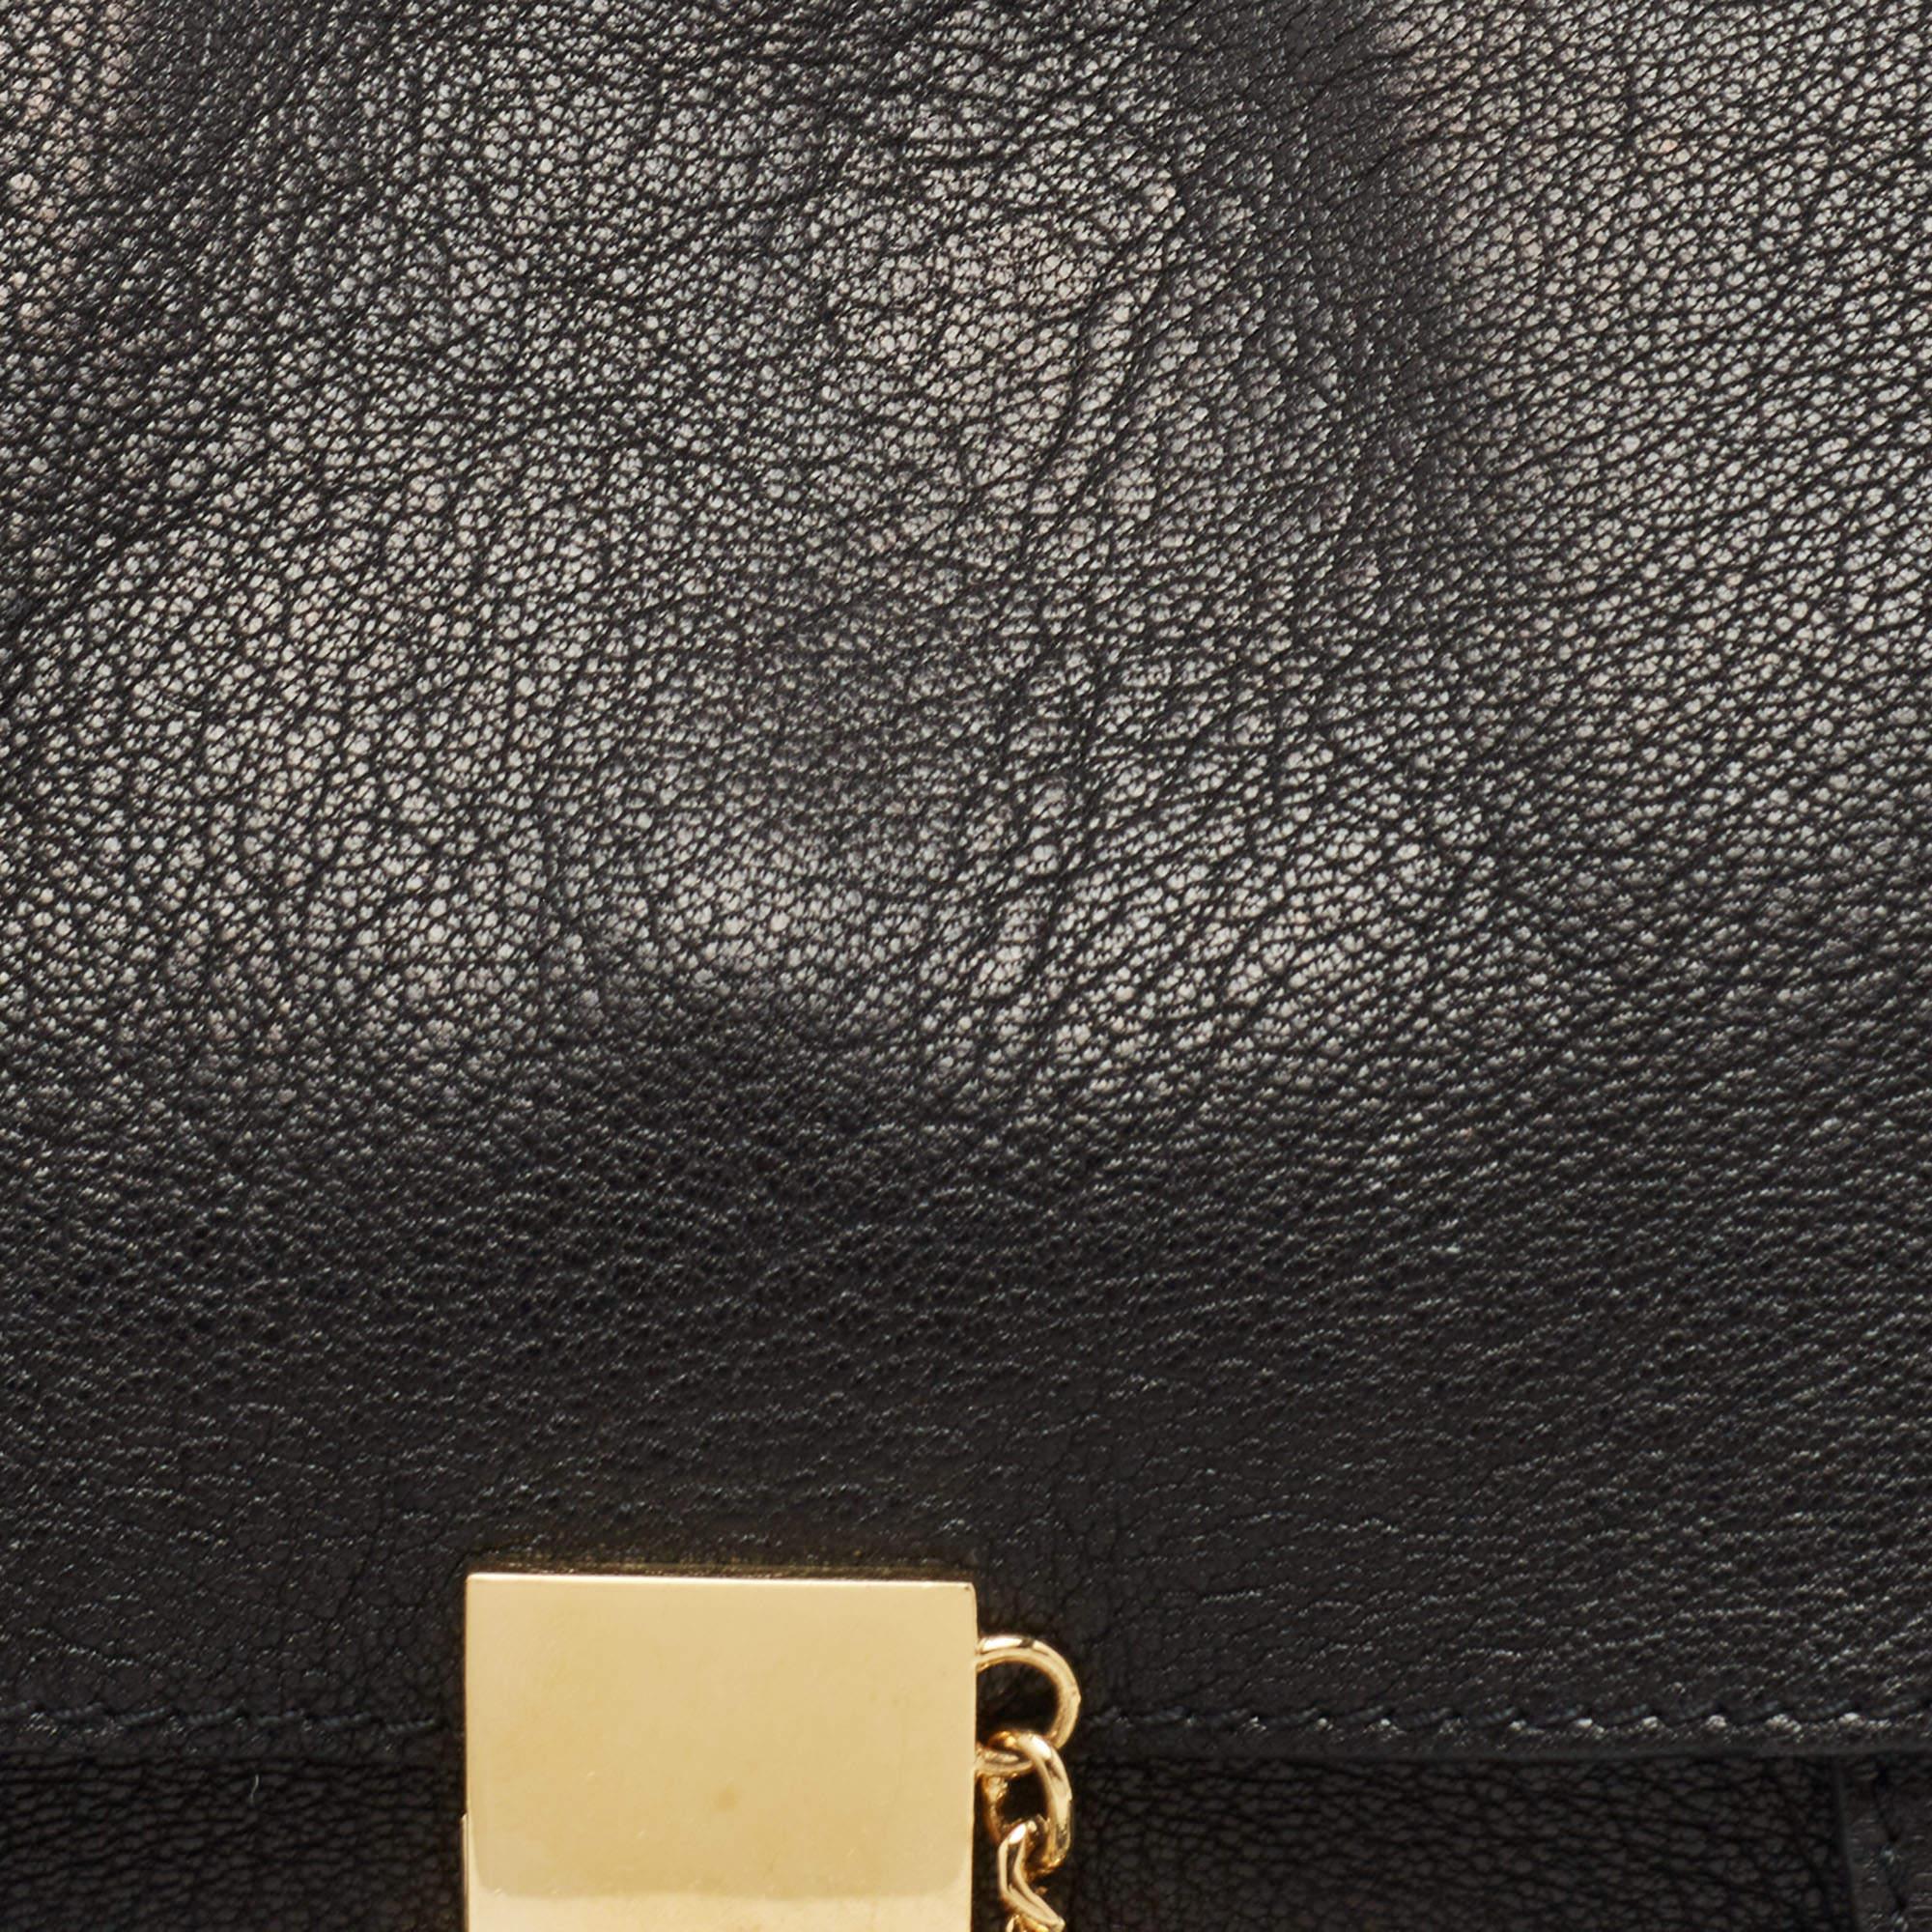 Chloe Black Grained Leather Drew Fold Over Clutch 9